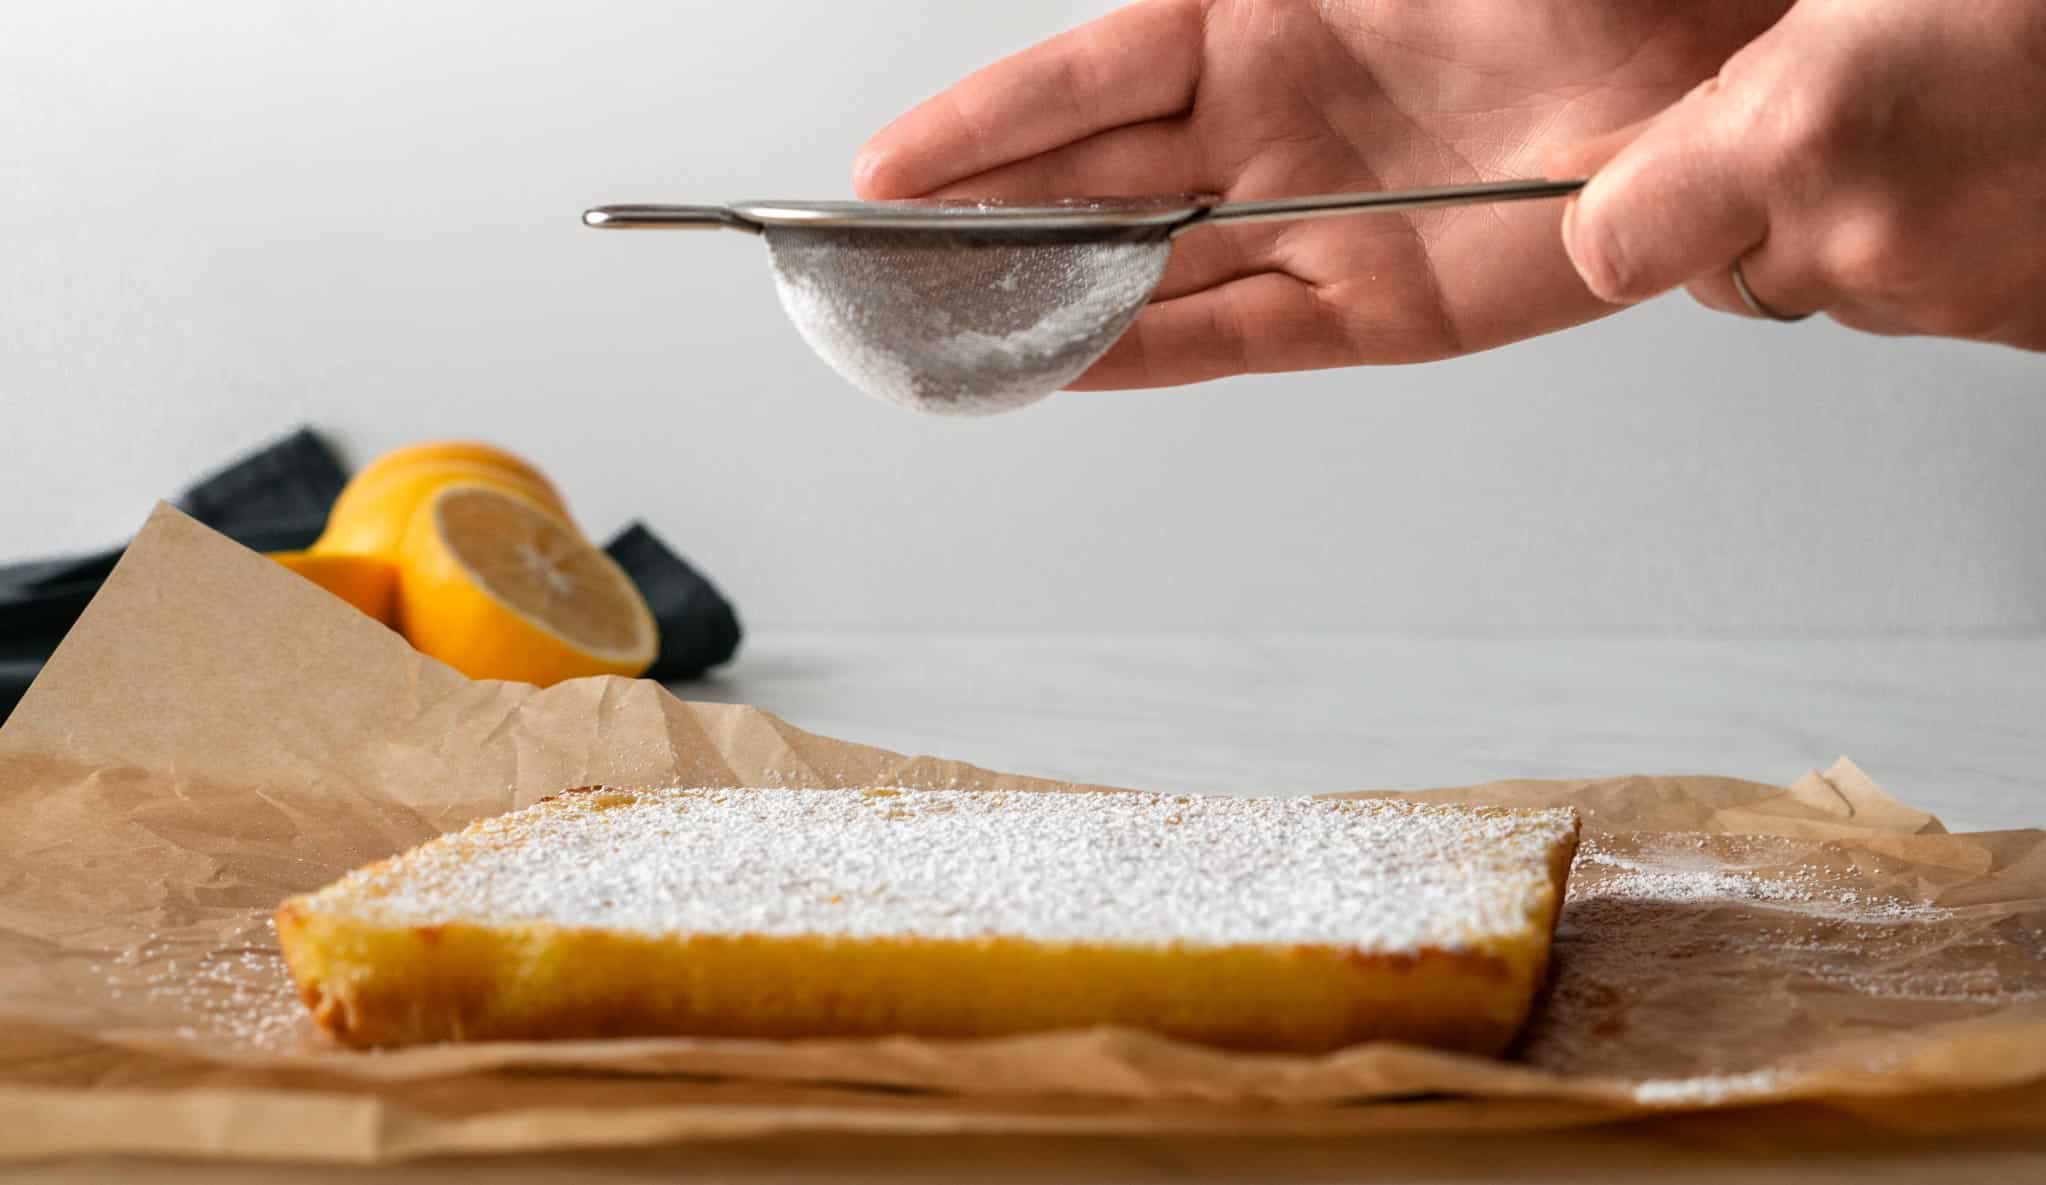 Meyer lemon bars being dusted with powdered sugar using a sifter